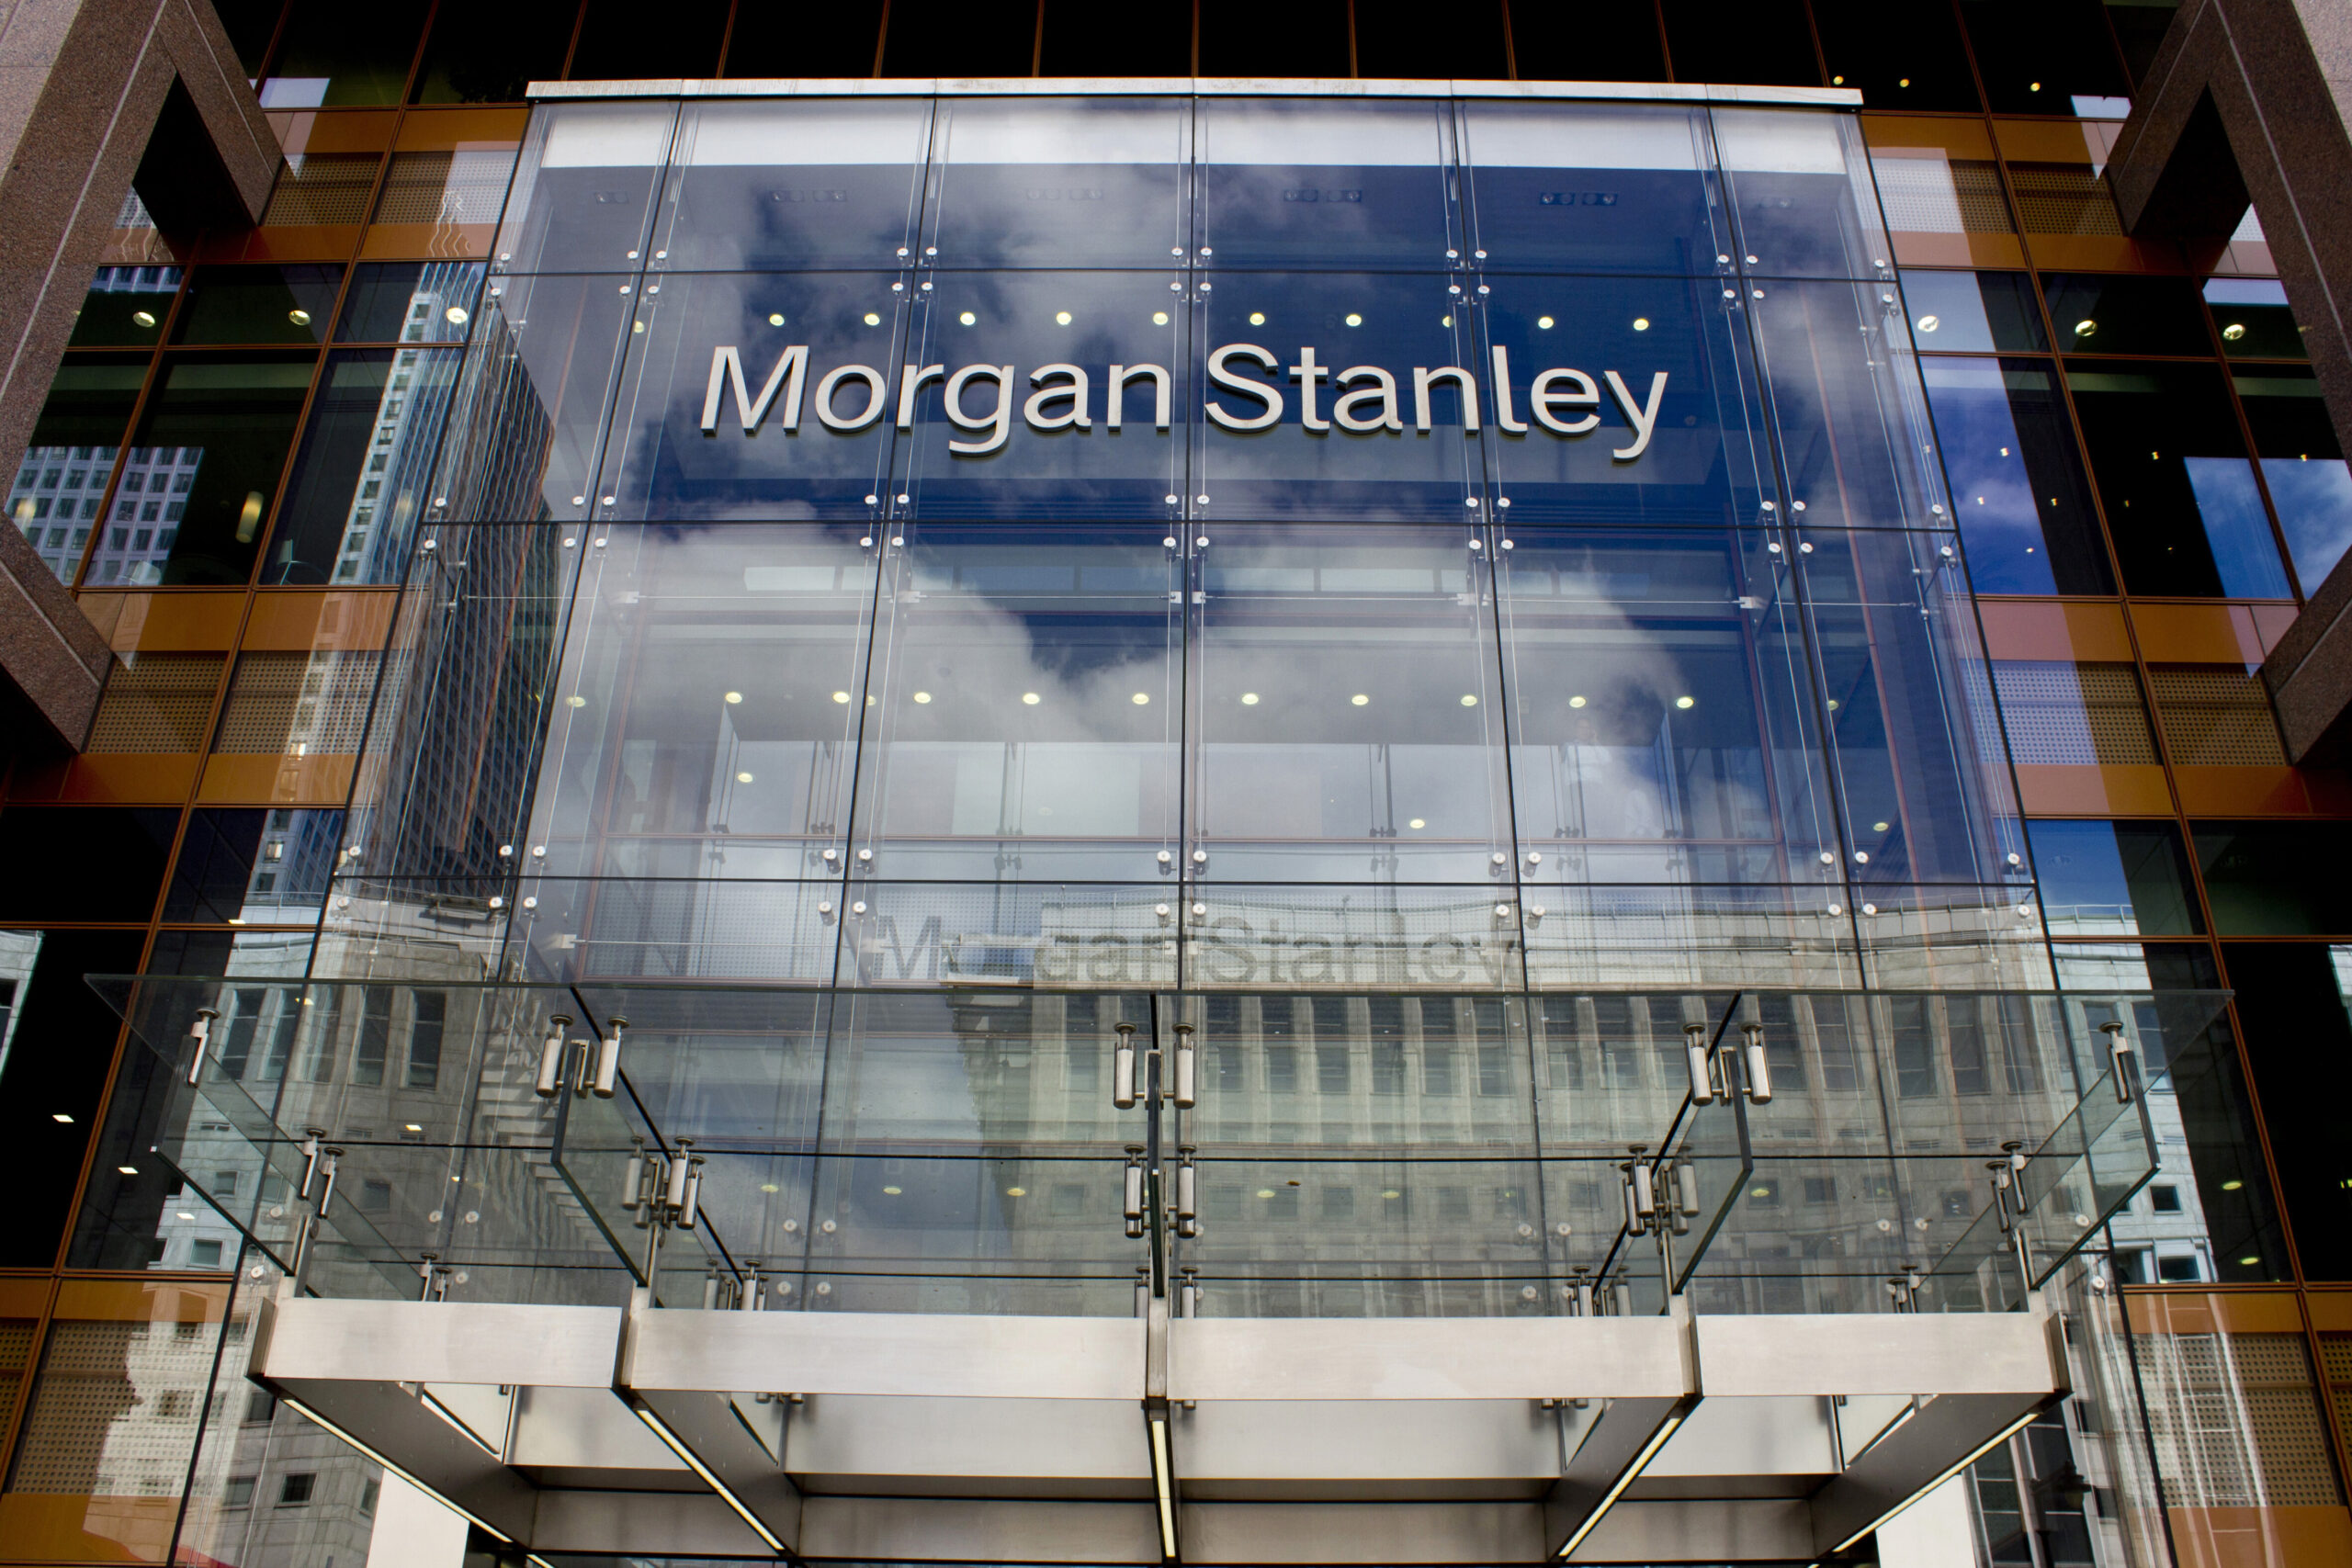 Morgan Stanley: Value Stocks – Opportunities Amid Macroeconomics Shifts